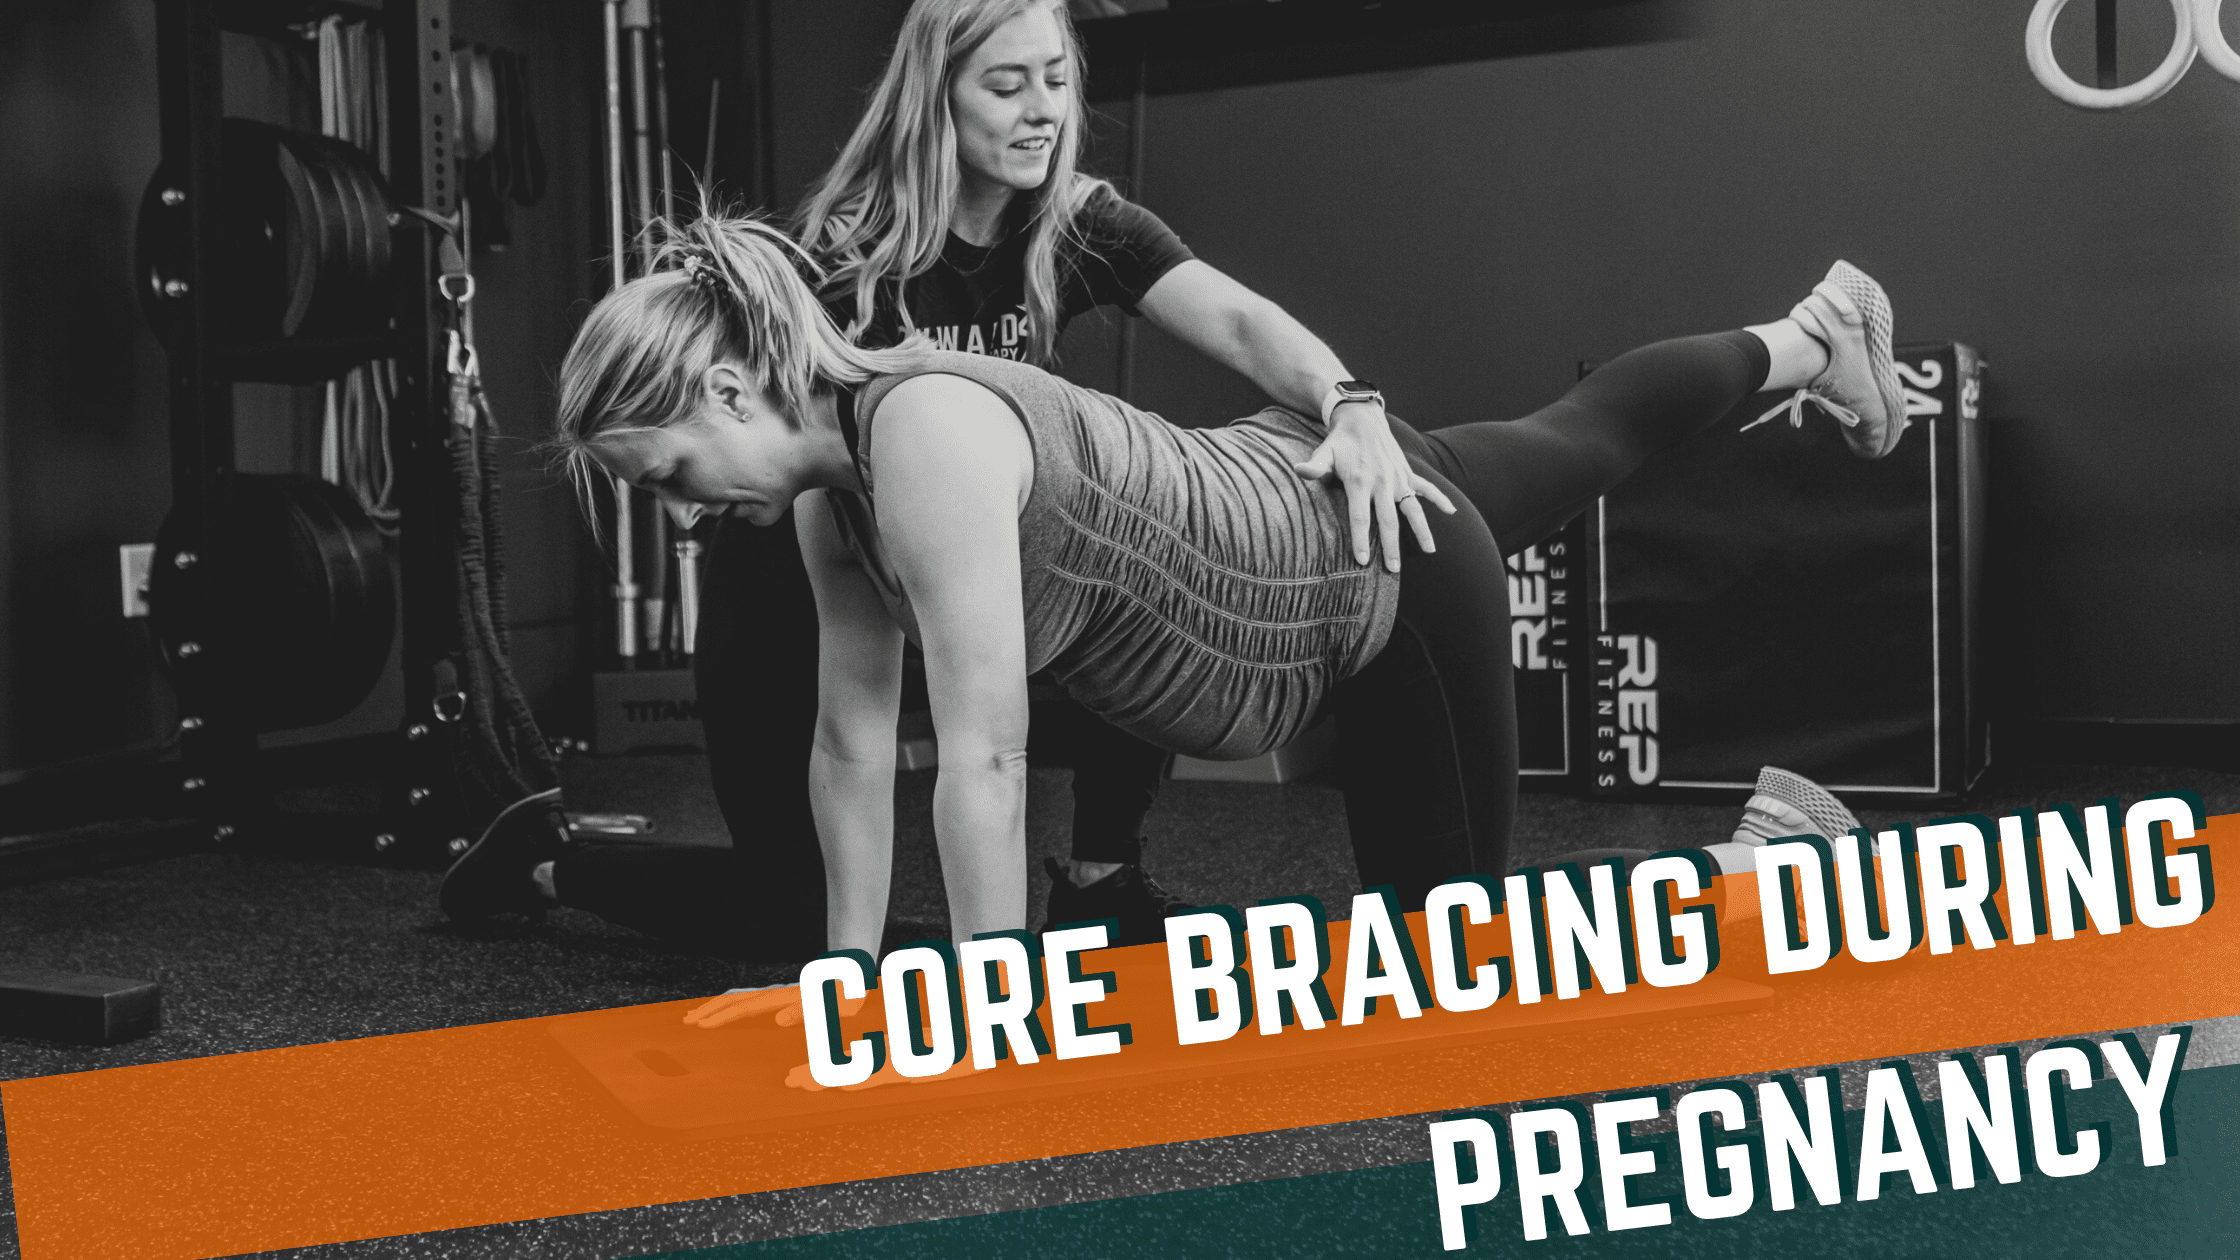 Featured image for “Core Bracing During Pregnancy”